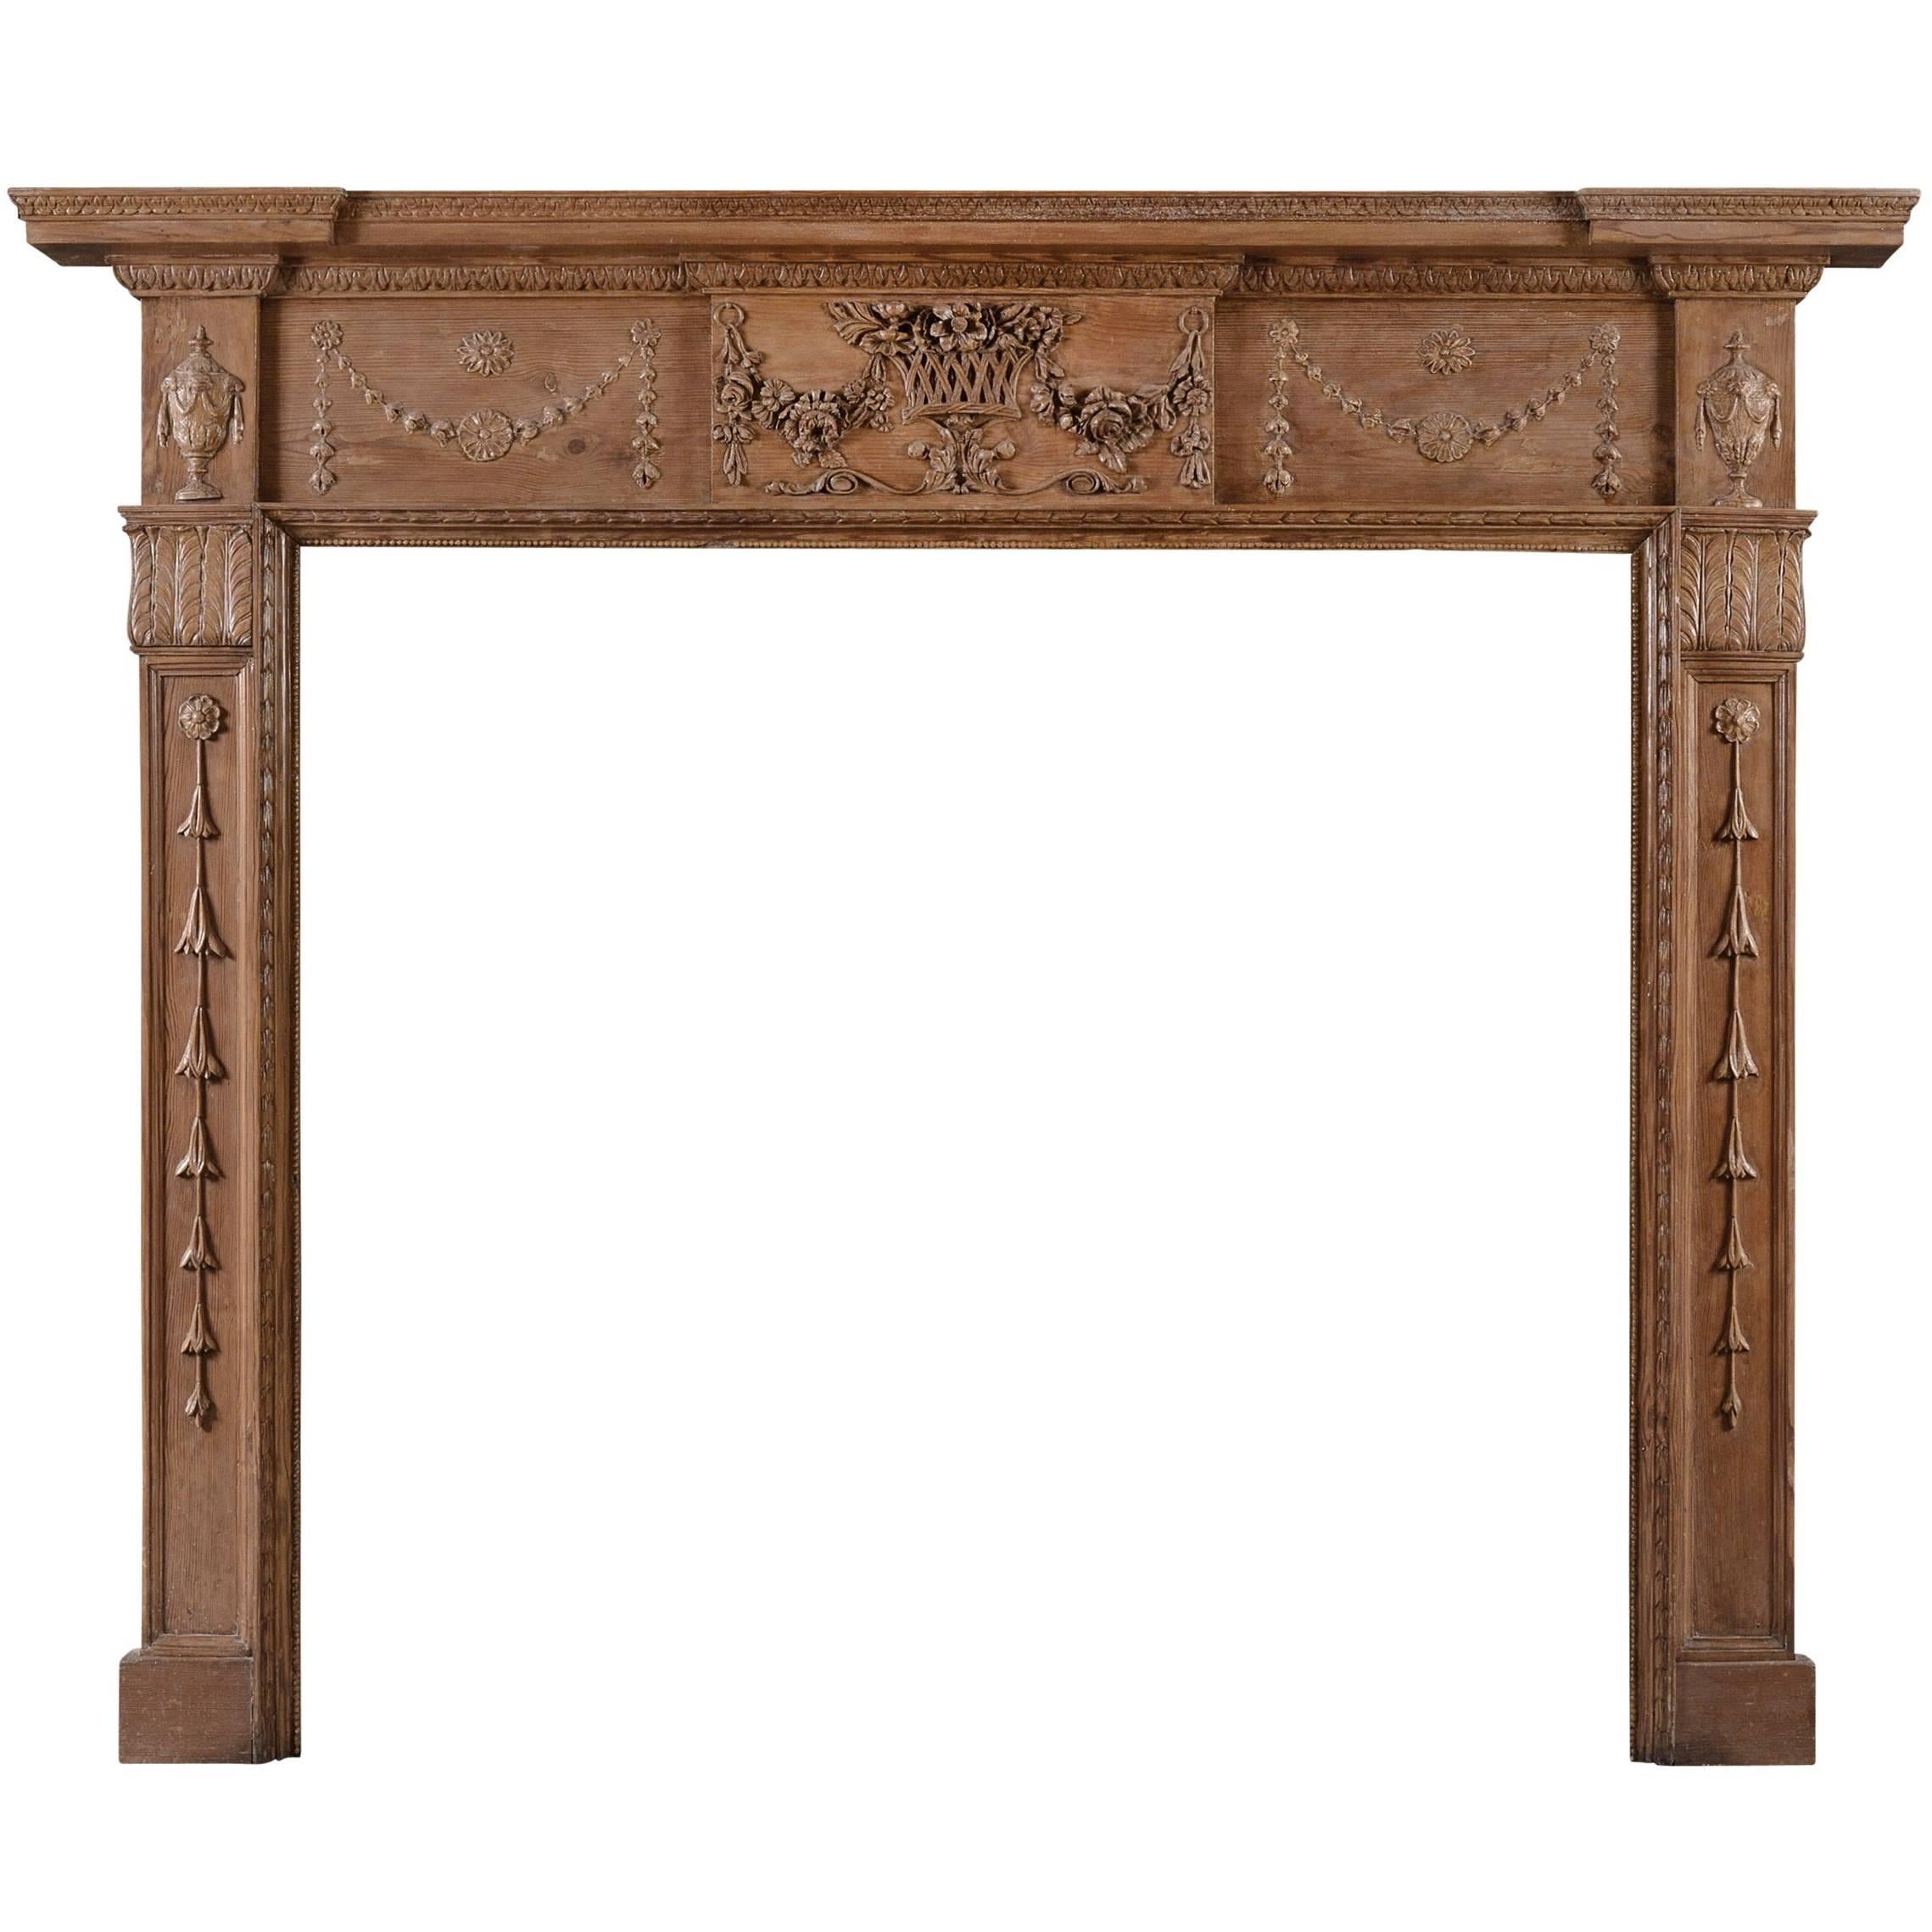 English Pine and Gesso Antique Fireplace For Sale